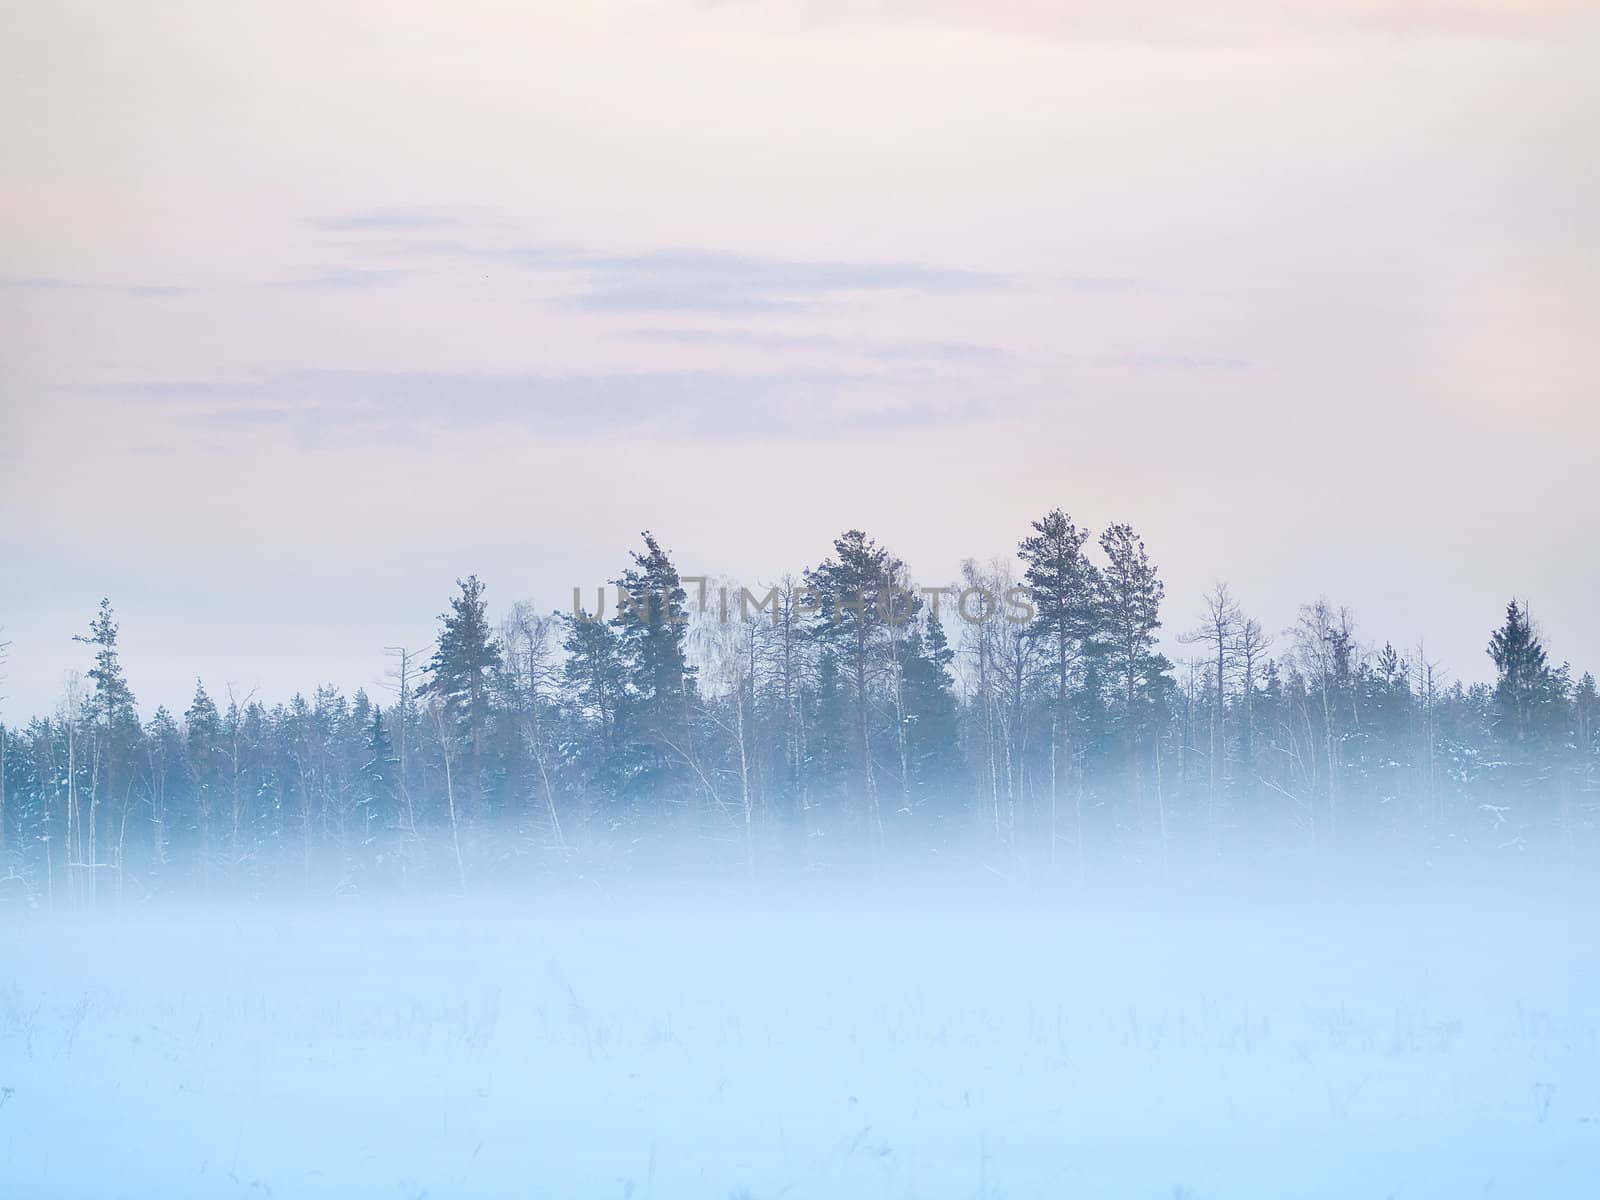 Winter field with trees, fog and colorful evening sky